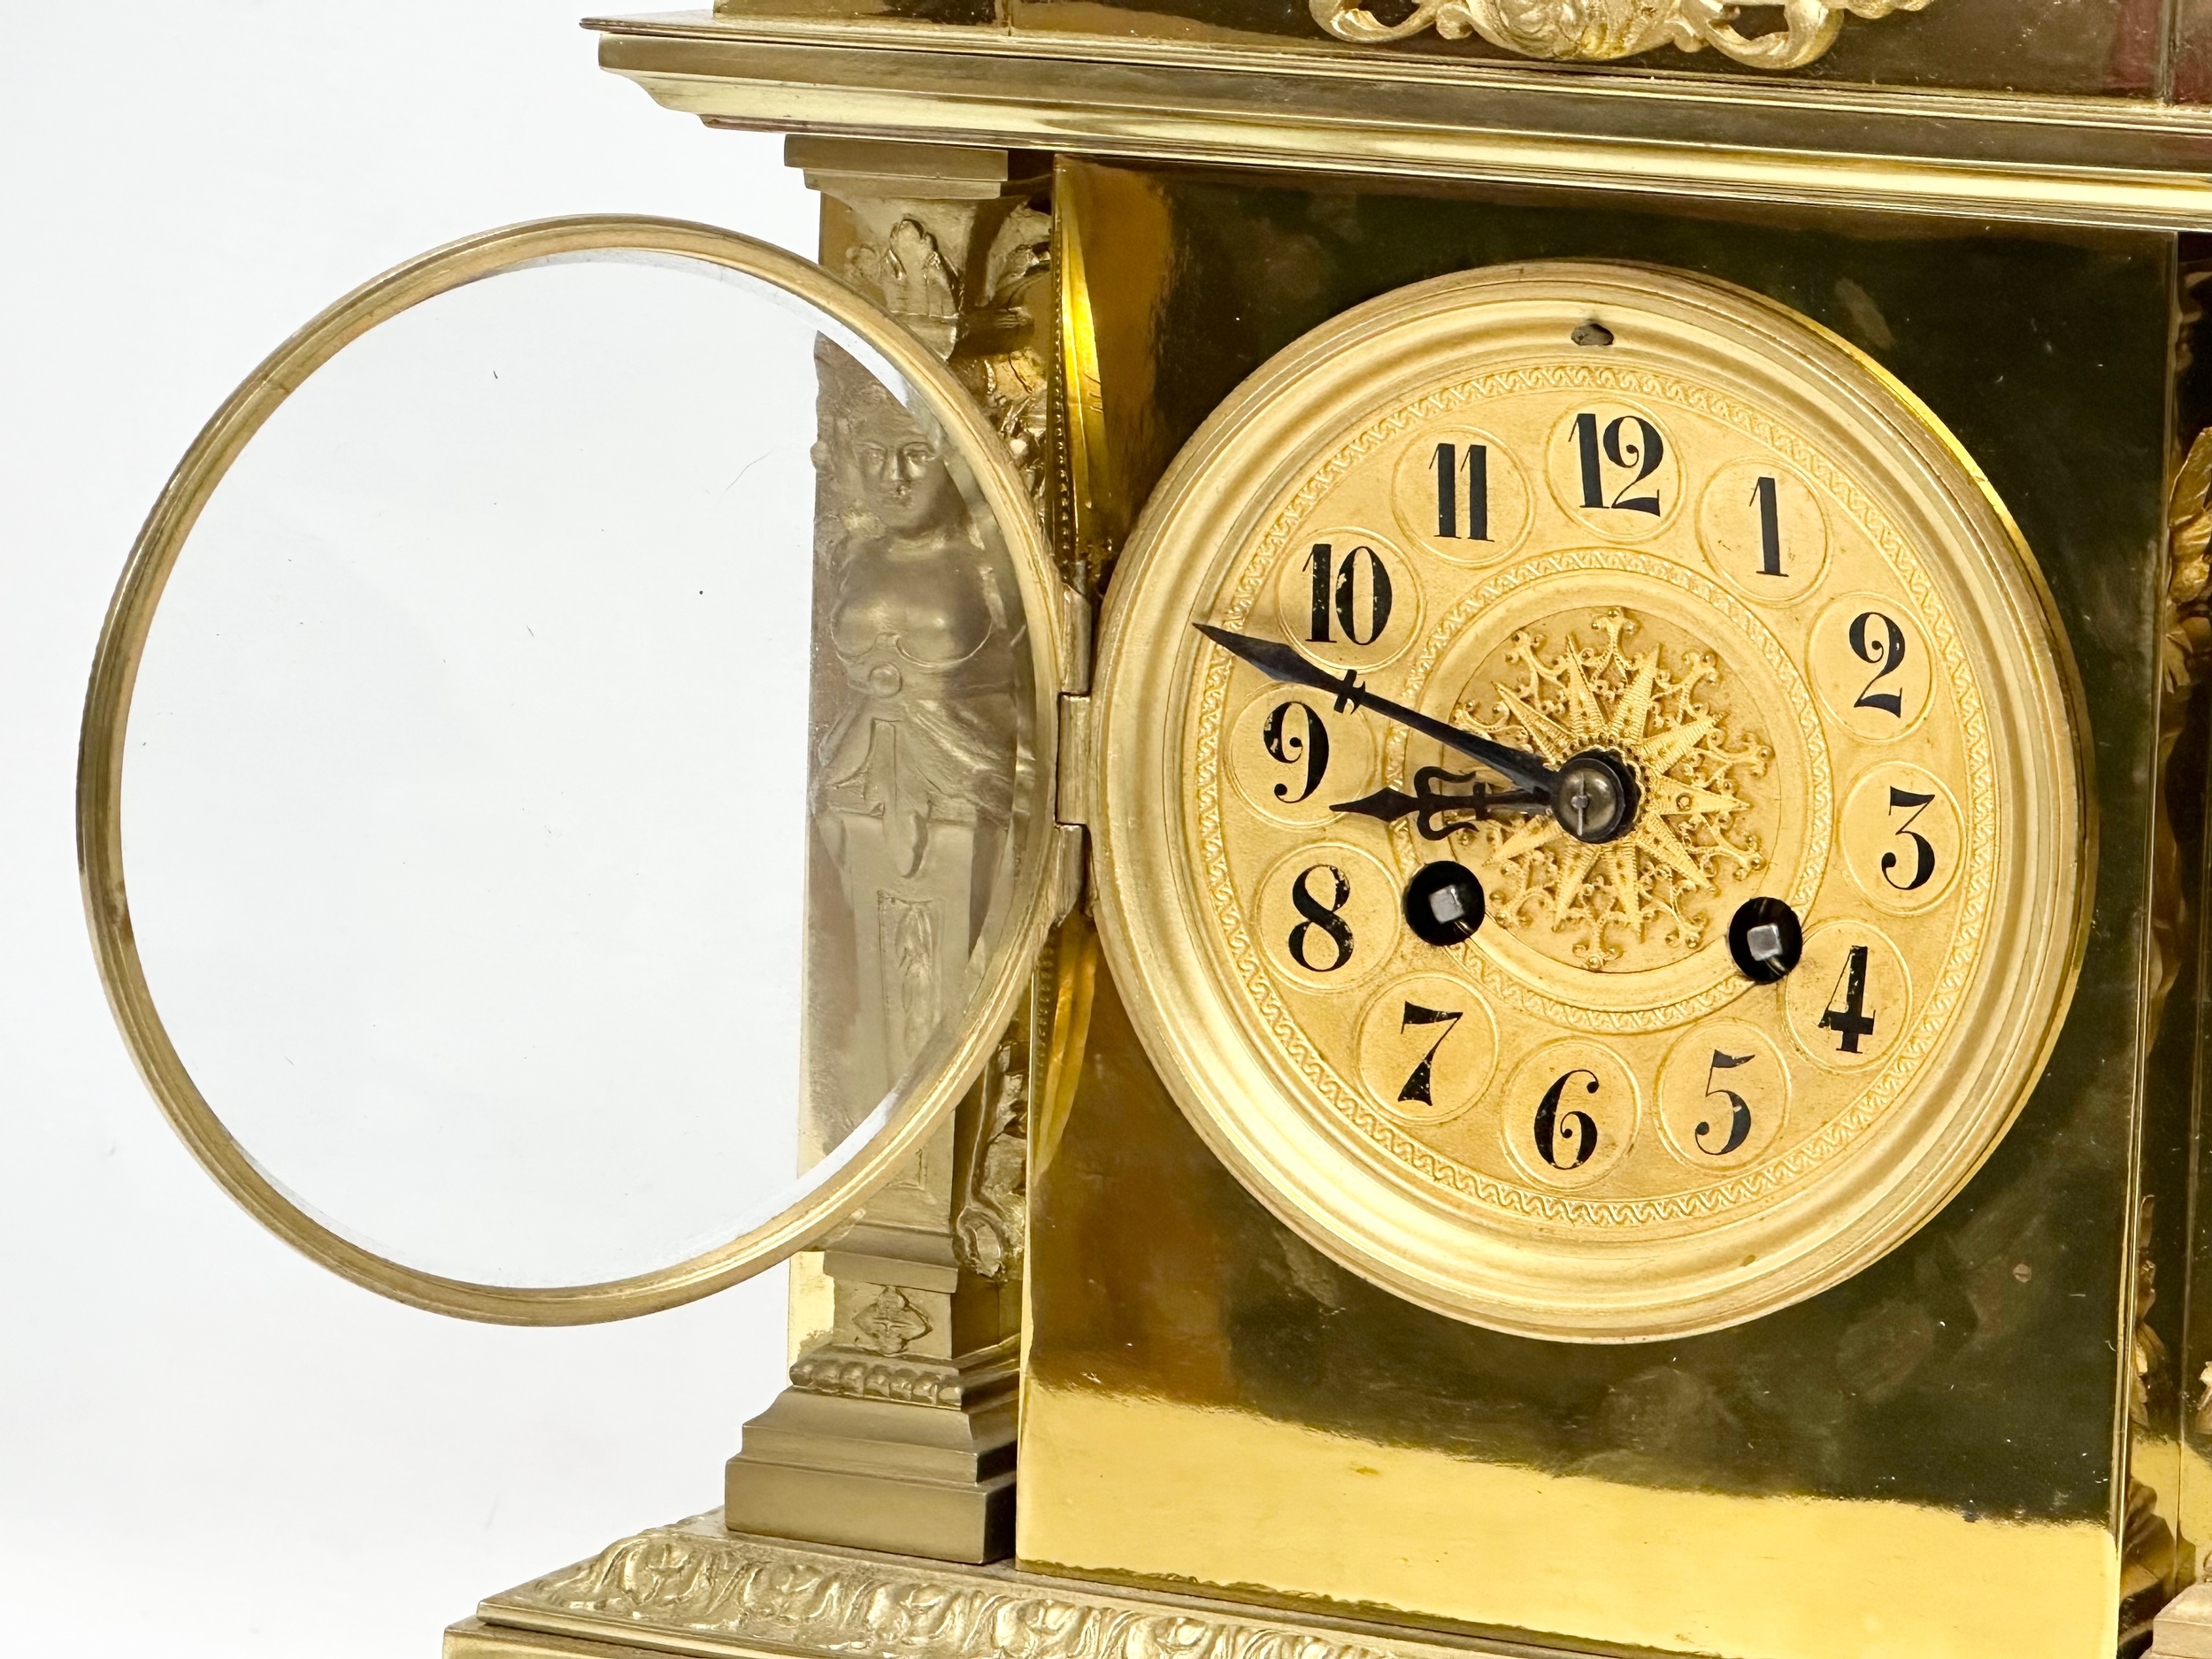 A late 19th century French brass mantle clock on stand. L. Marti Medaille D’Argent 1889. With key - Image 5 of 9